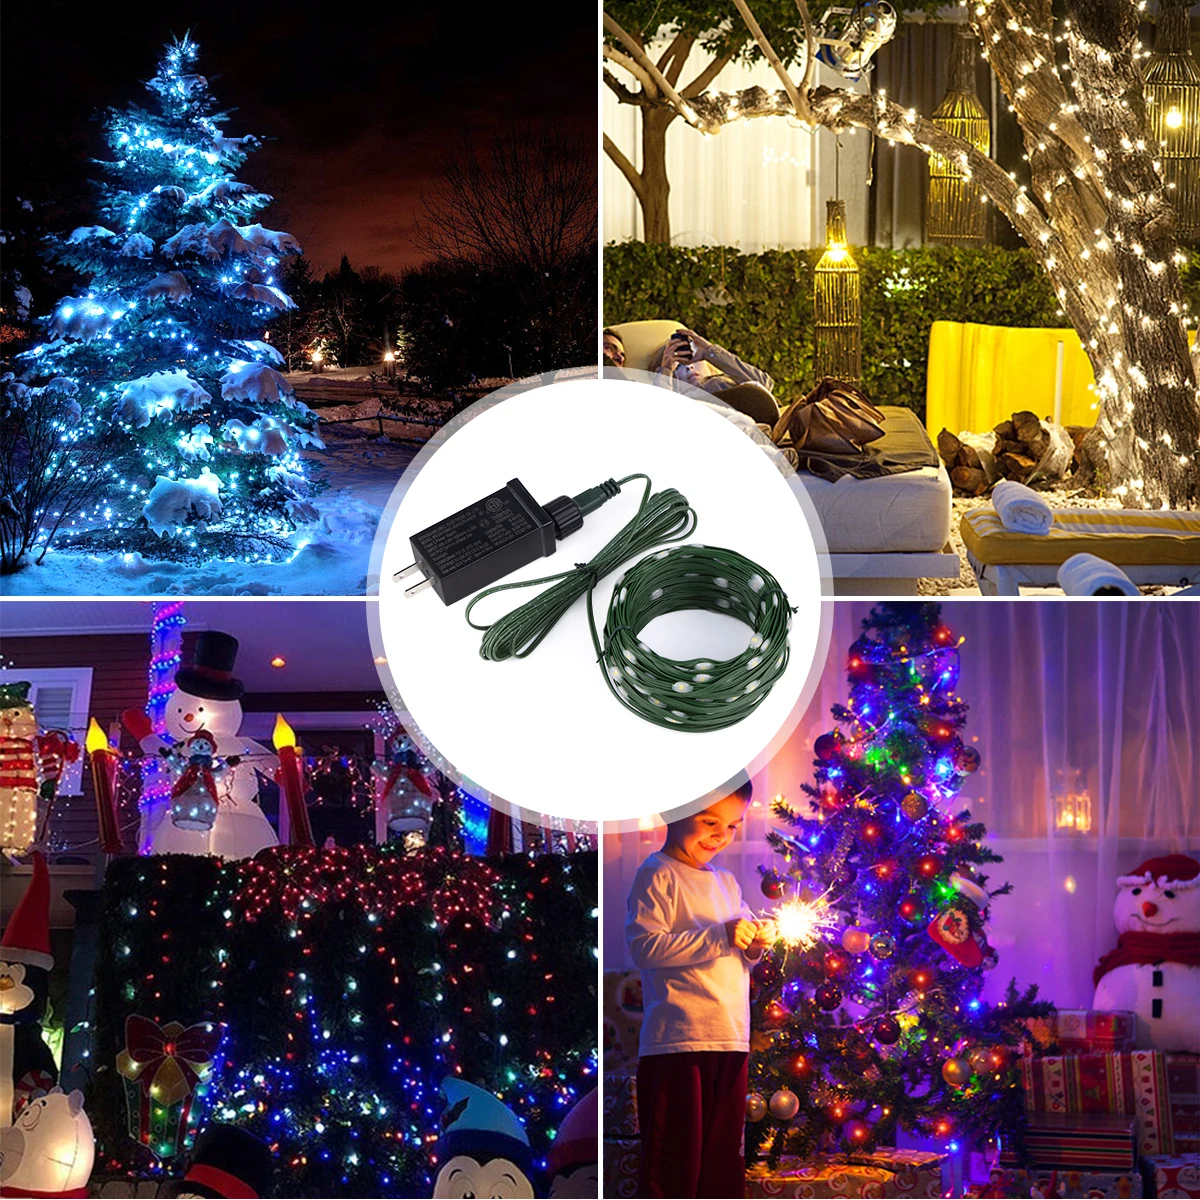 https://ae01.alicdn.com/kf/Sb3801daf898441b89e0a045c3631dd1cw/10M-100M-Green-Wire-Outdoor-LED-String-Light-New-Year-Fairy-Lights-Garland-Waterproof-Holiday-Party.jpg